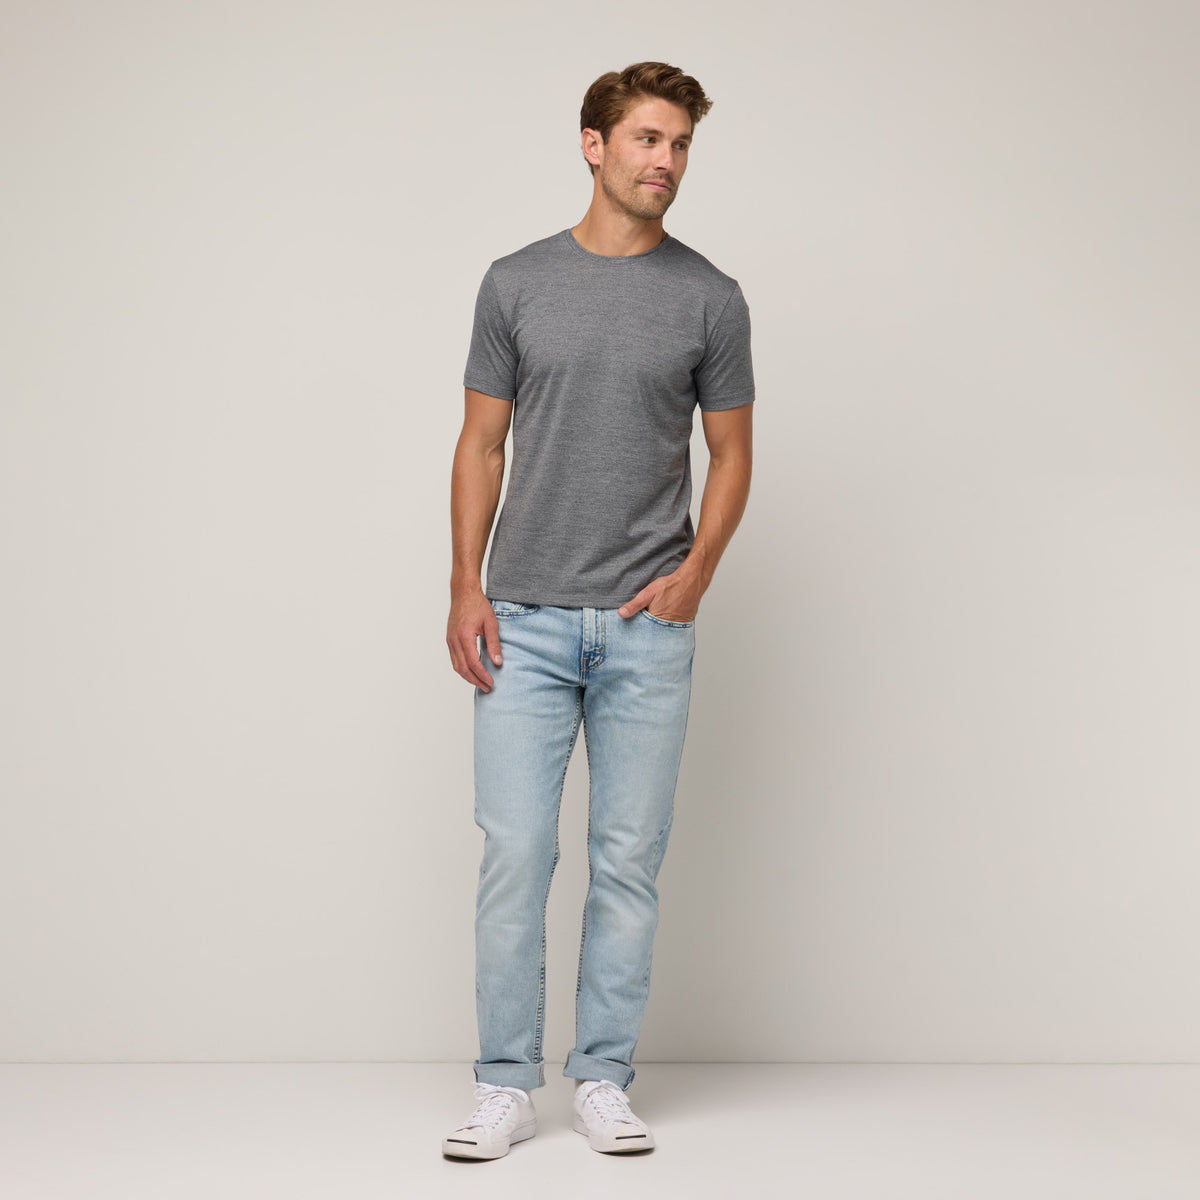 image-on-hover,model-spec: Matt is 6'2", 176 lbs, and wears size M